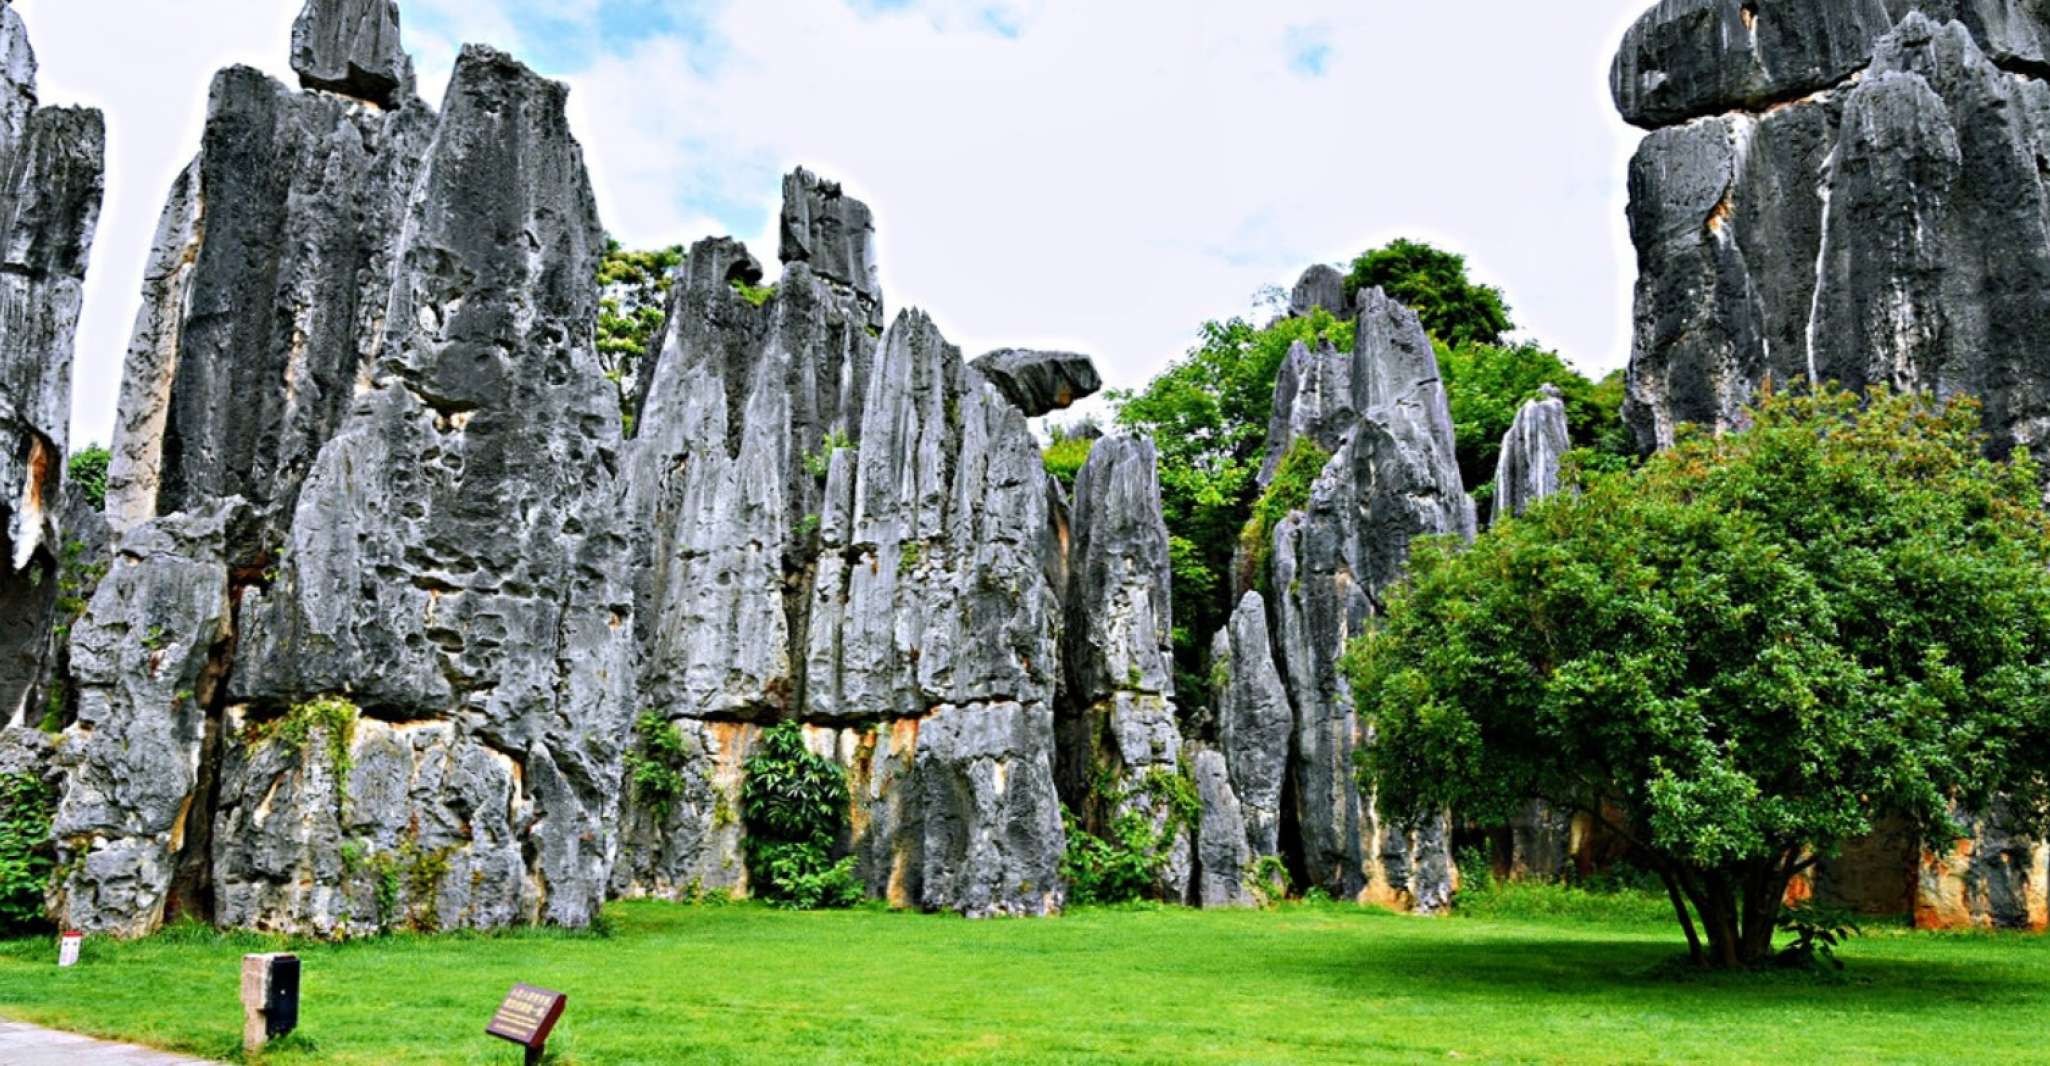 Private tour to Kunming stone forest and Cuihu lake - Housity